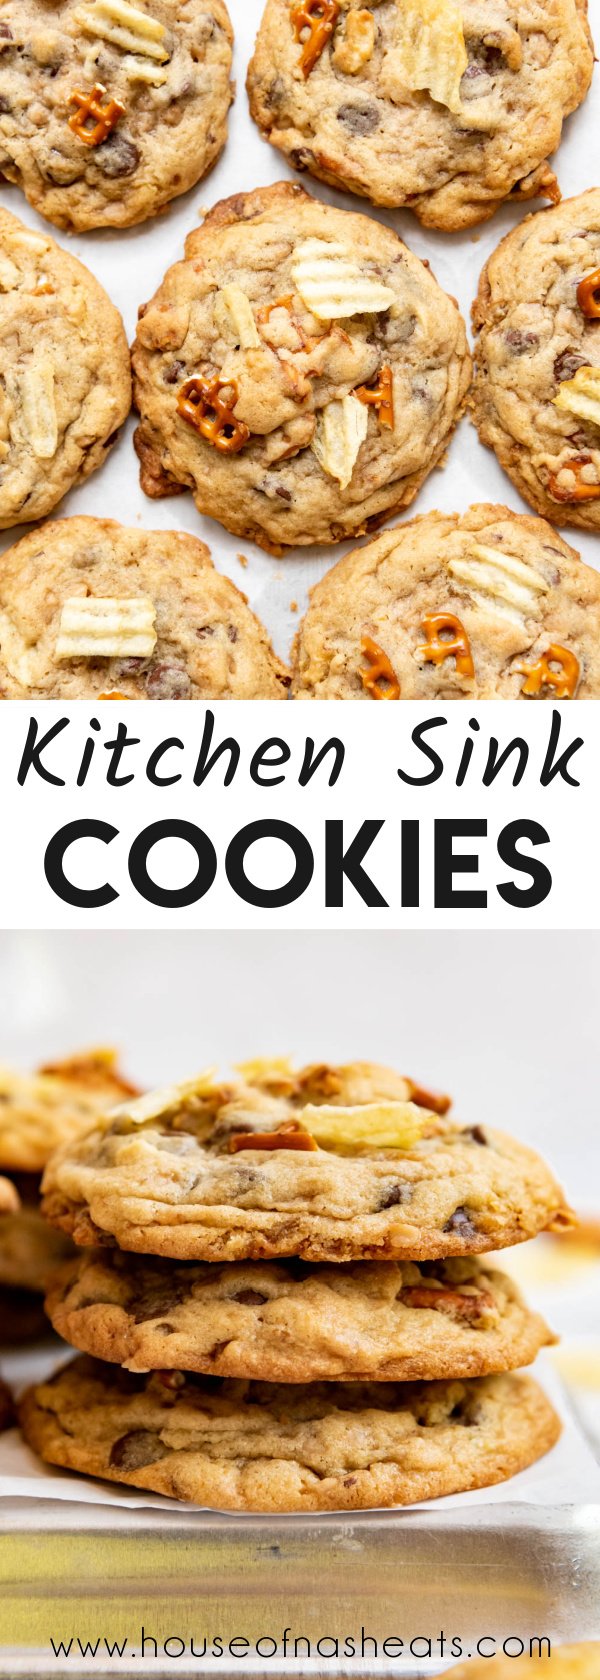 A collage of images of kitchen sink cookies with text overlay.